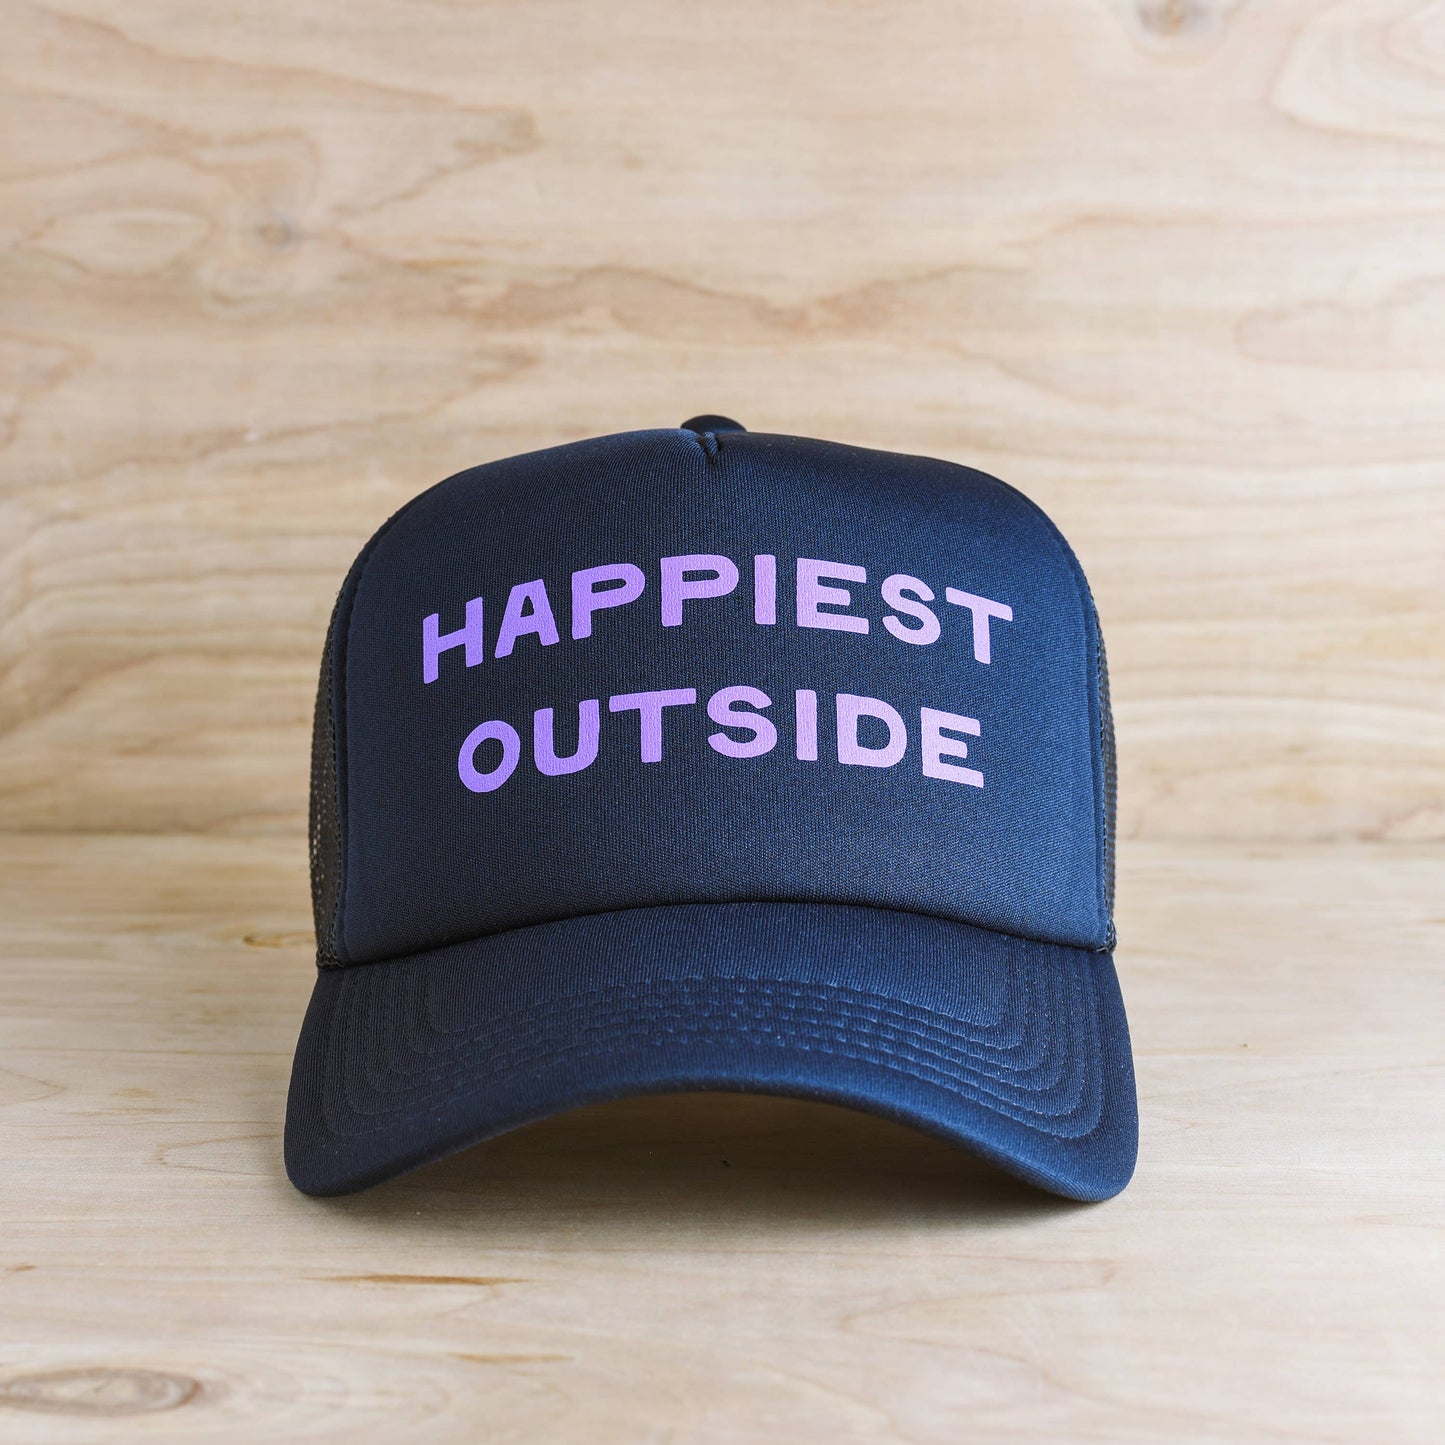 Happiest Outside Woman's Recycled Trucker Hat - navy